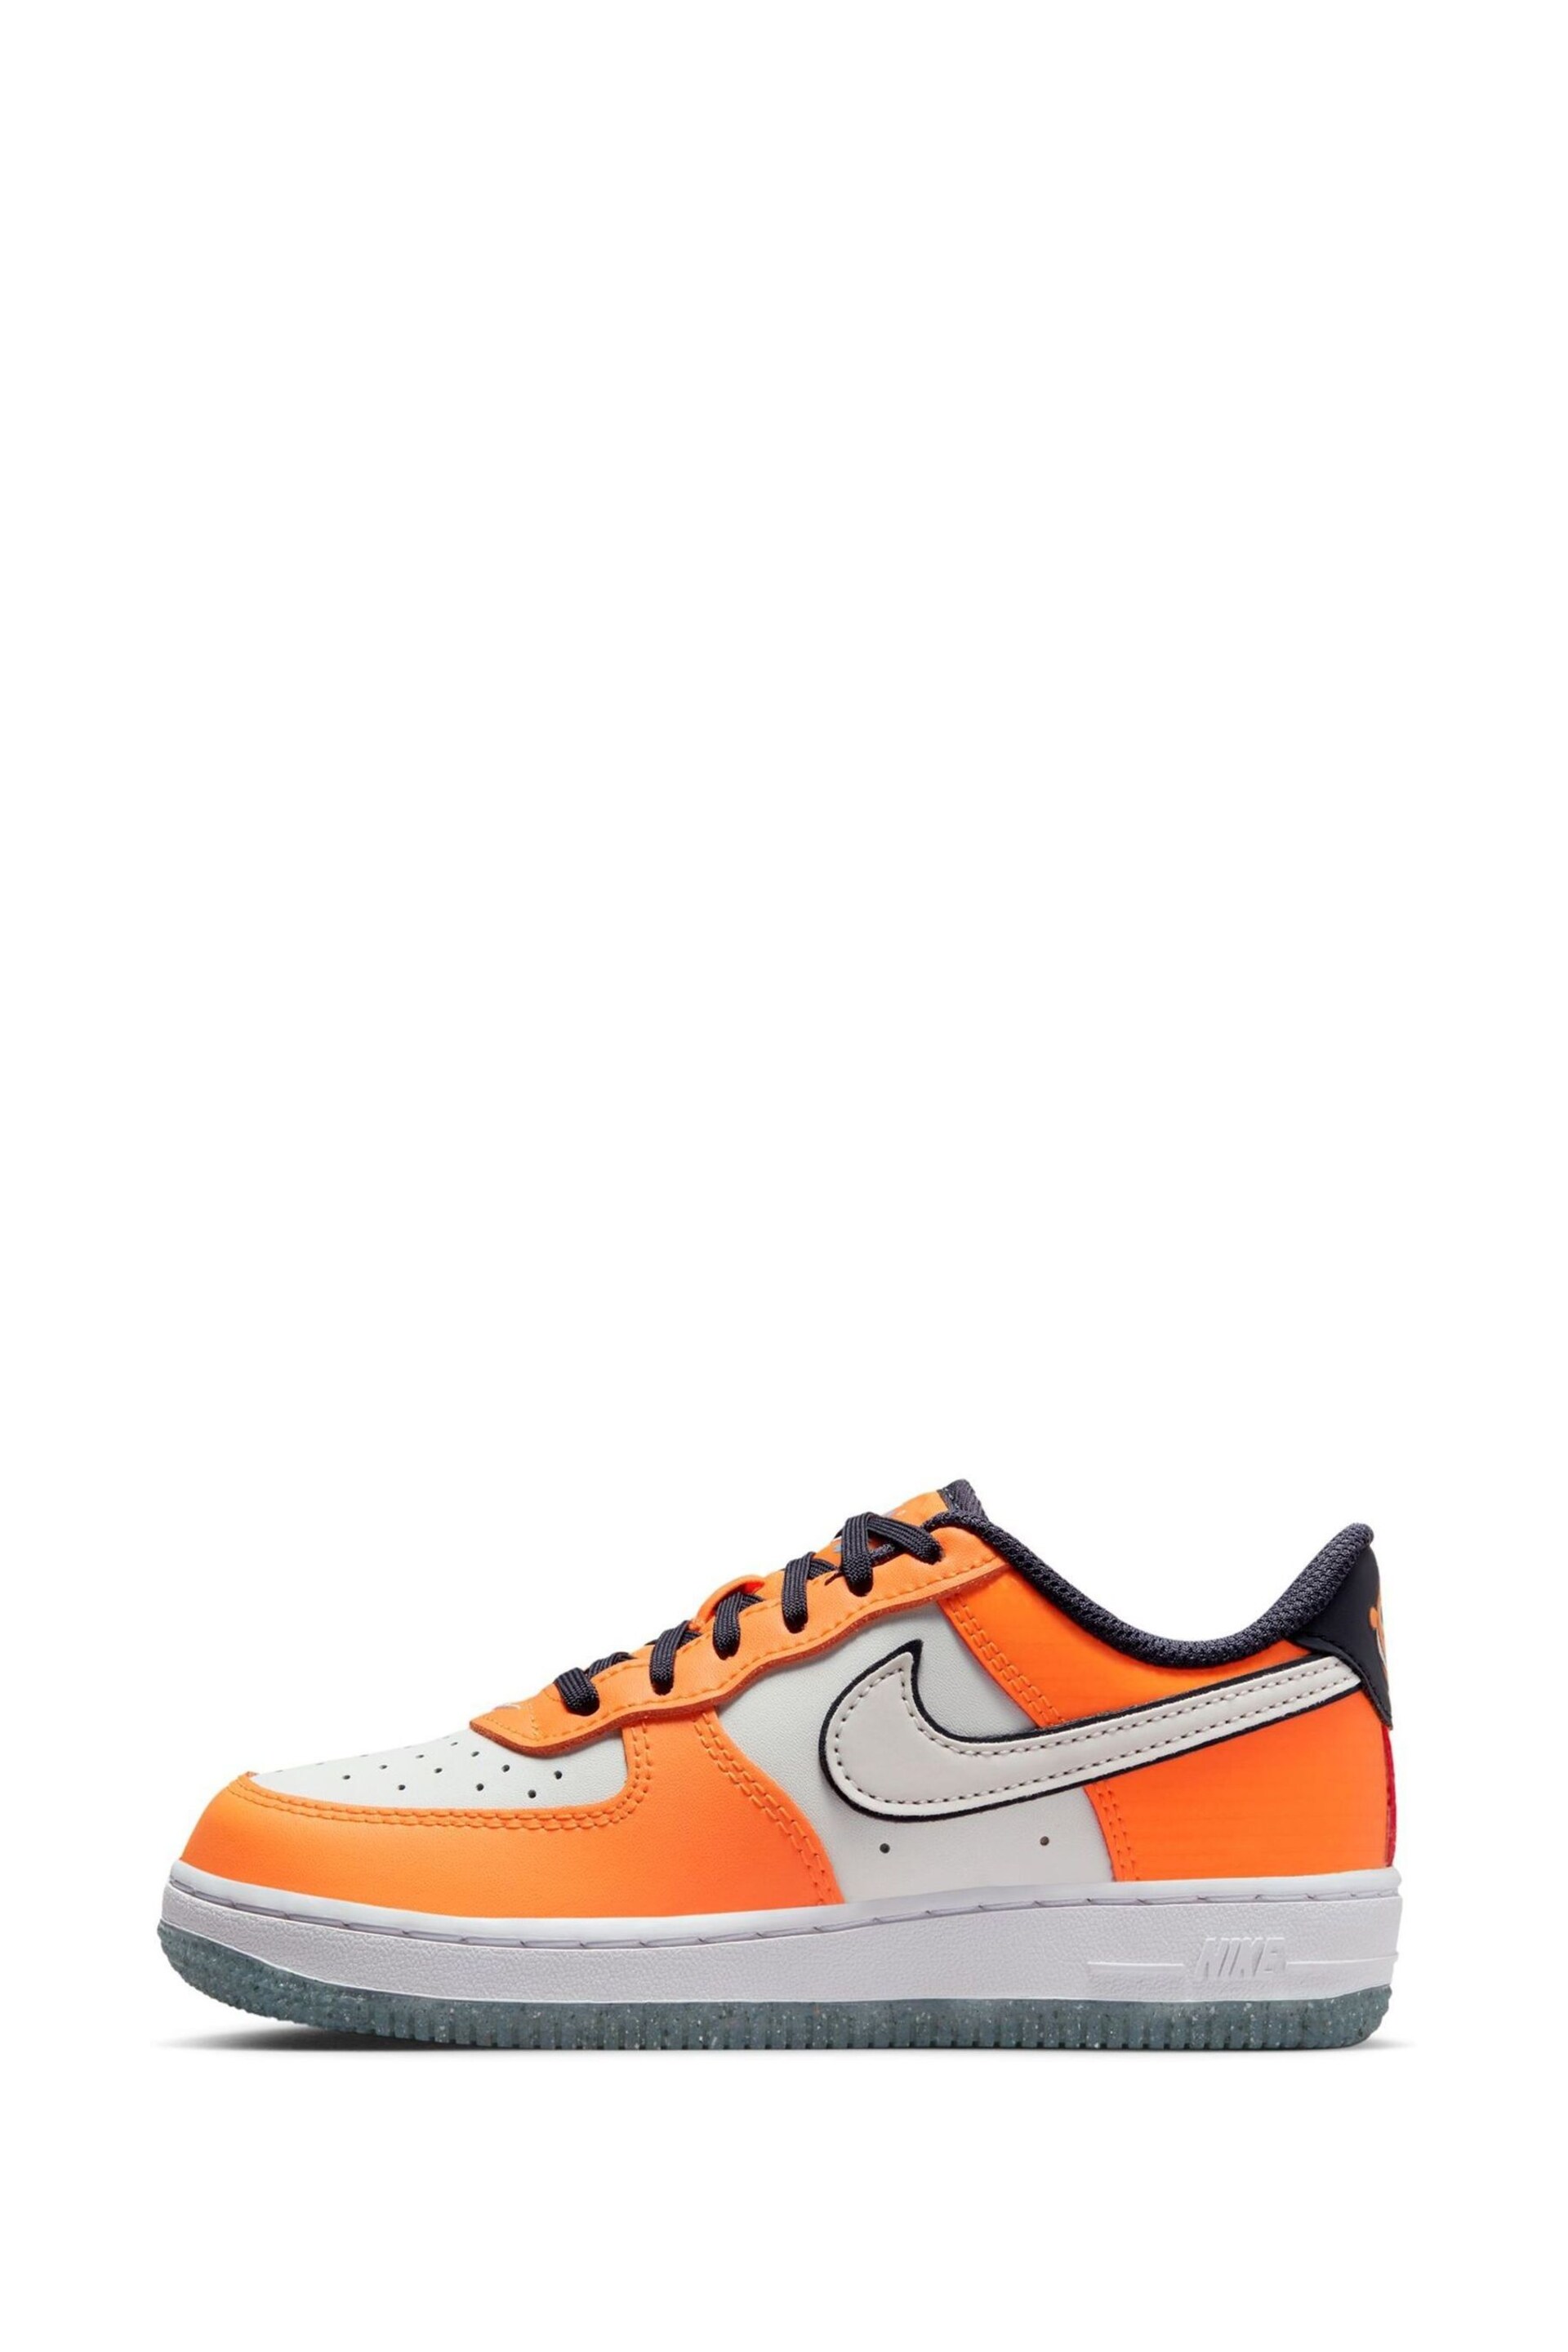 Nike Orange Force 1 Low Junior Trainers - Image 2 of 11